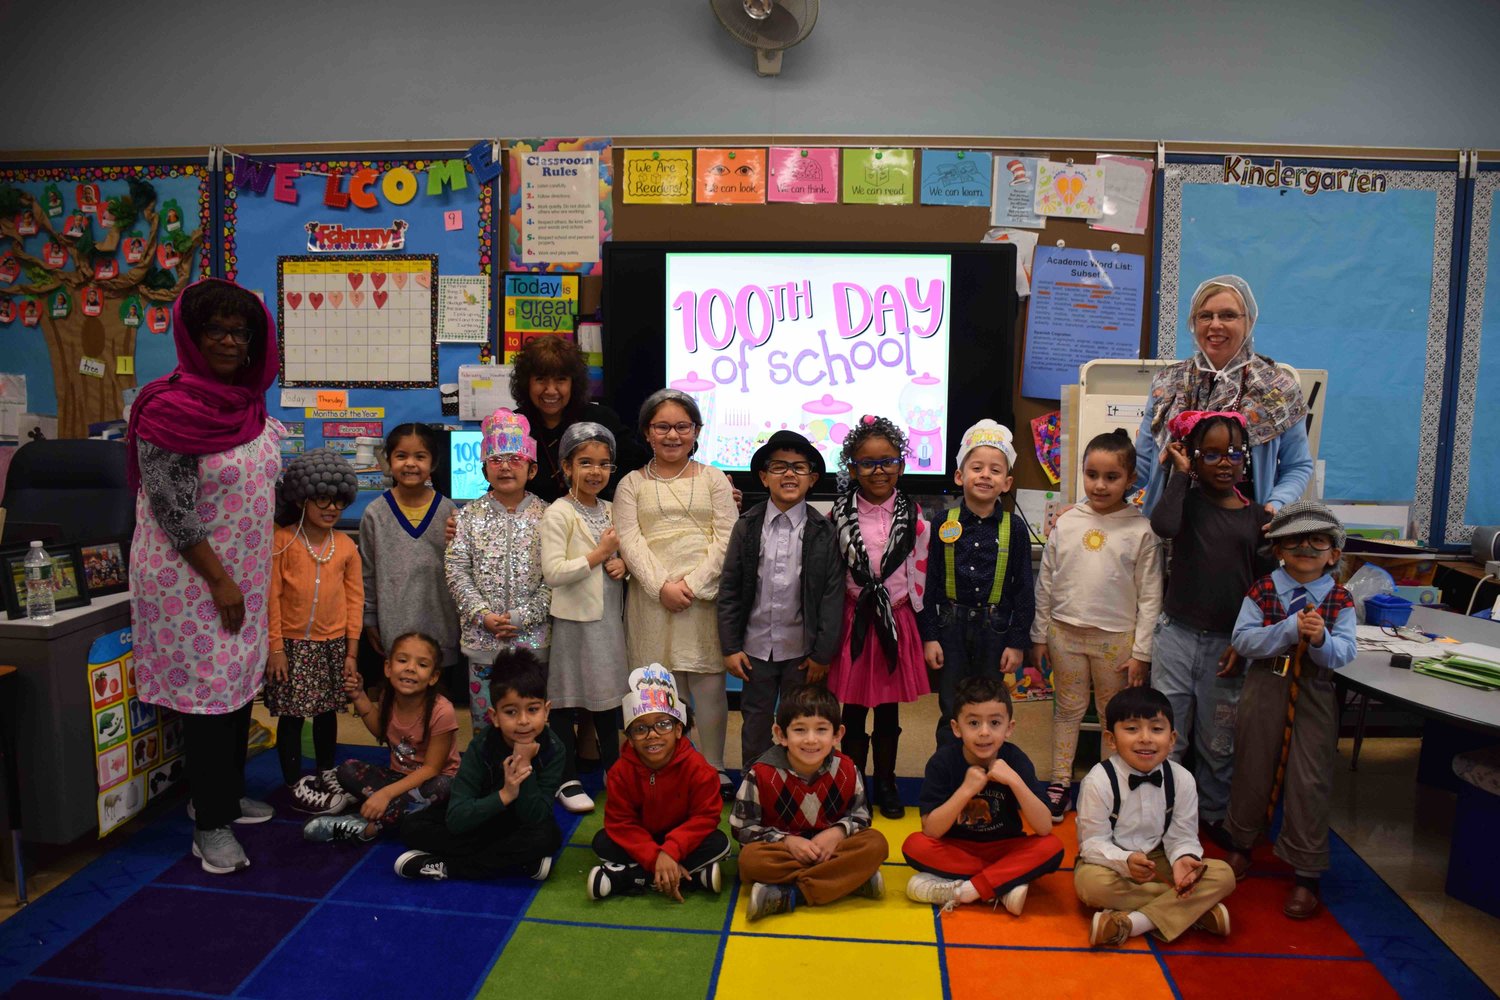 Kindergarten students in Ms. Catherine Byrne’s class at Columbus Avenue School dressed up as centenarians to celebrate the school’s 100th day.